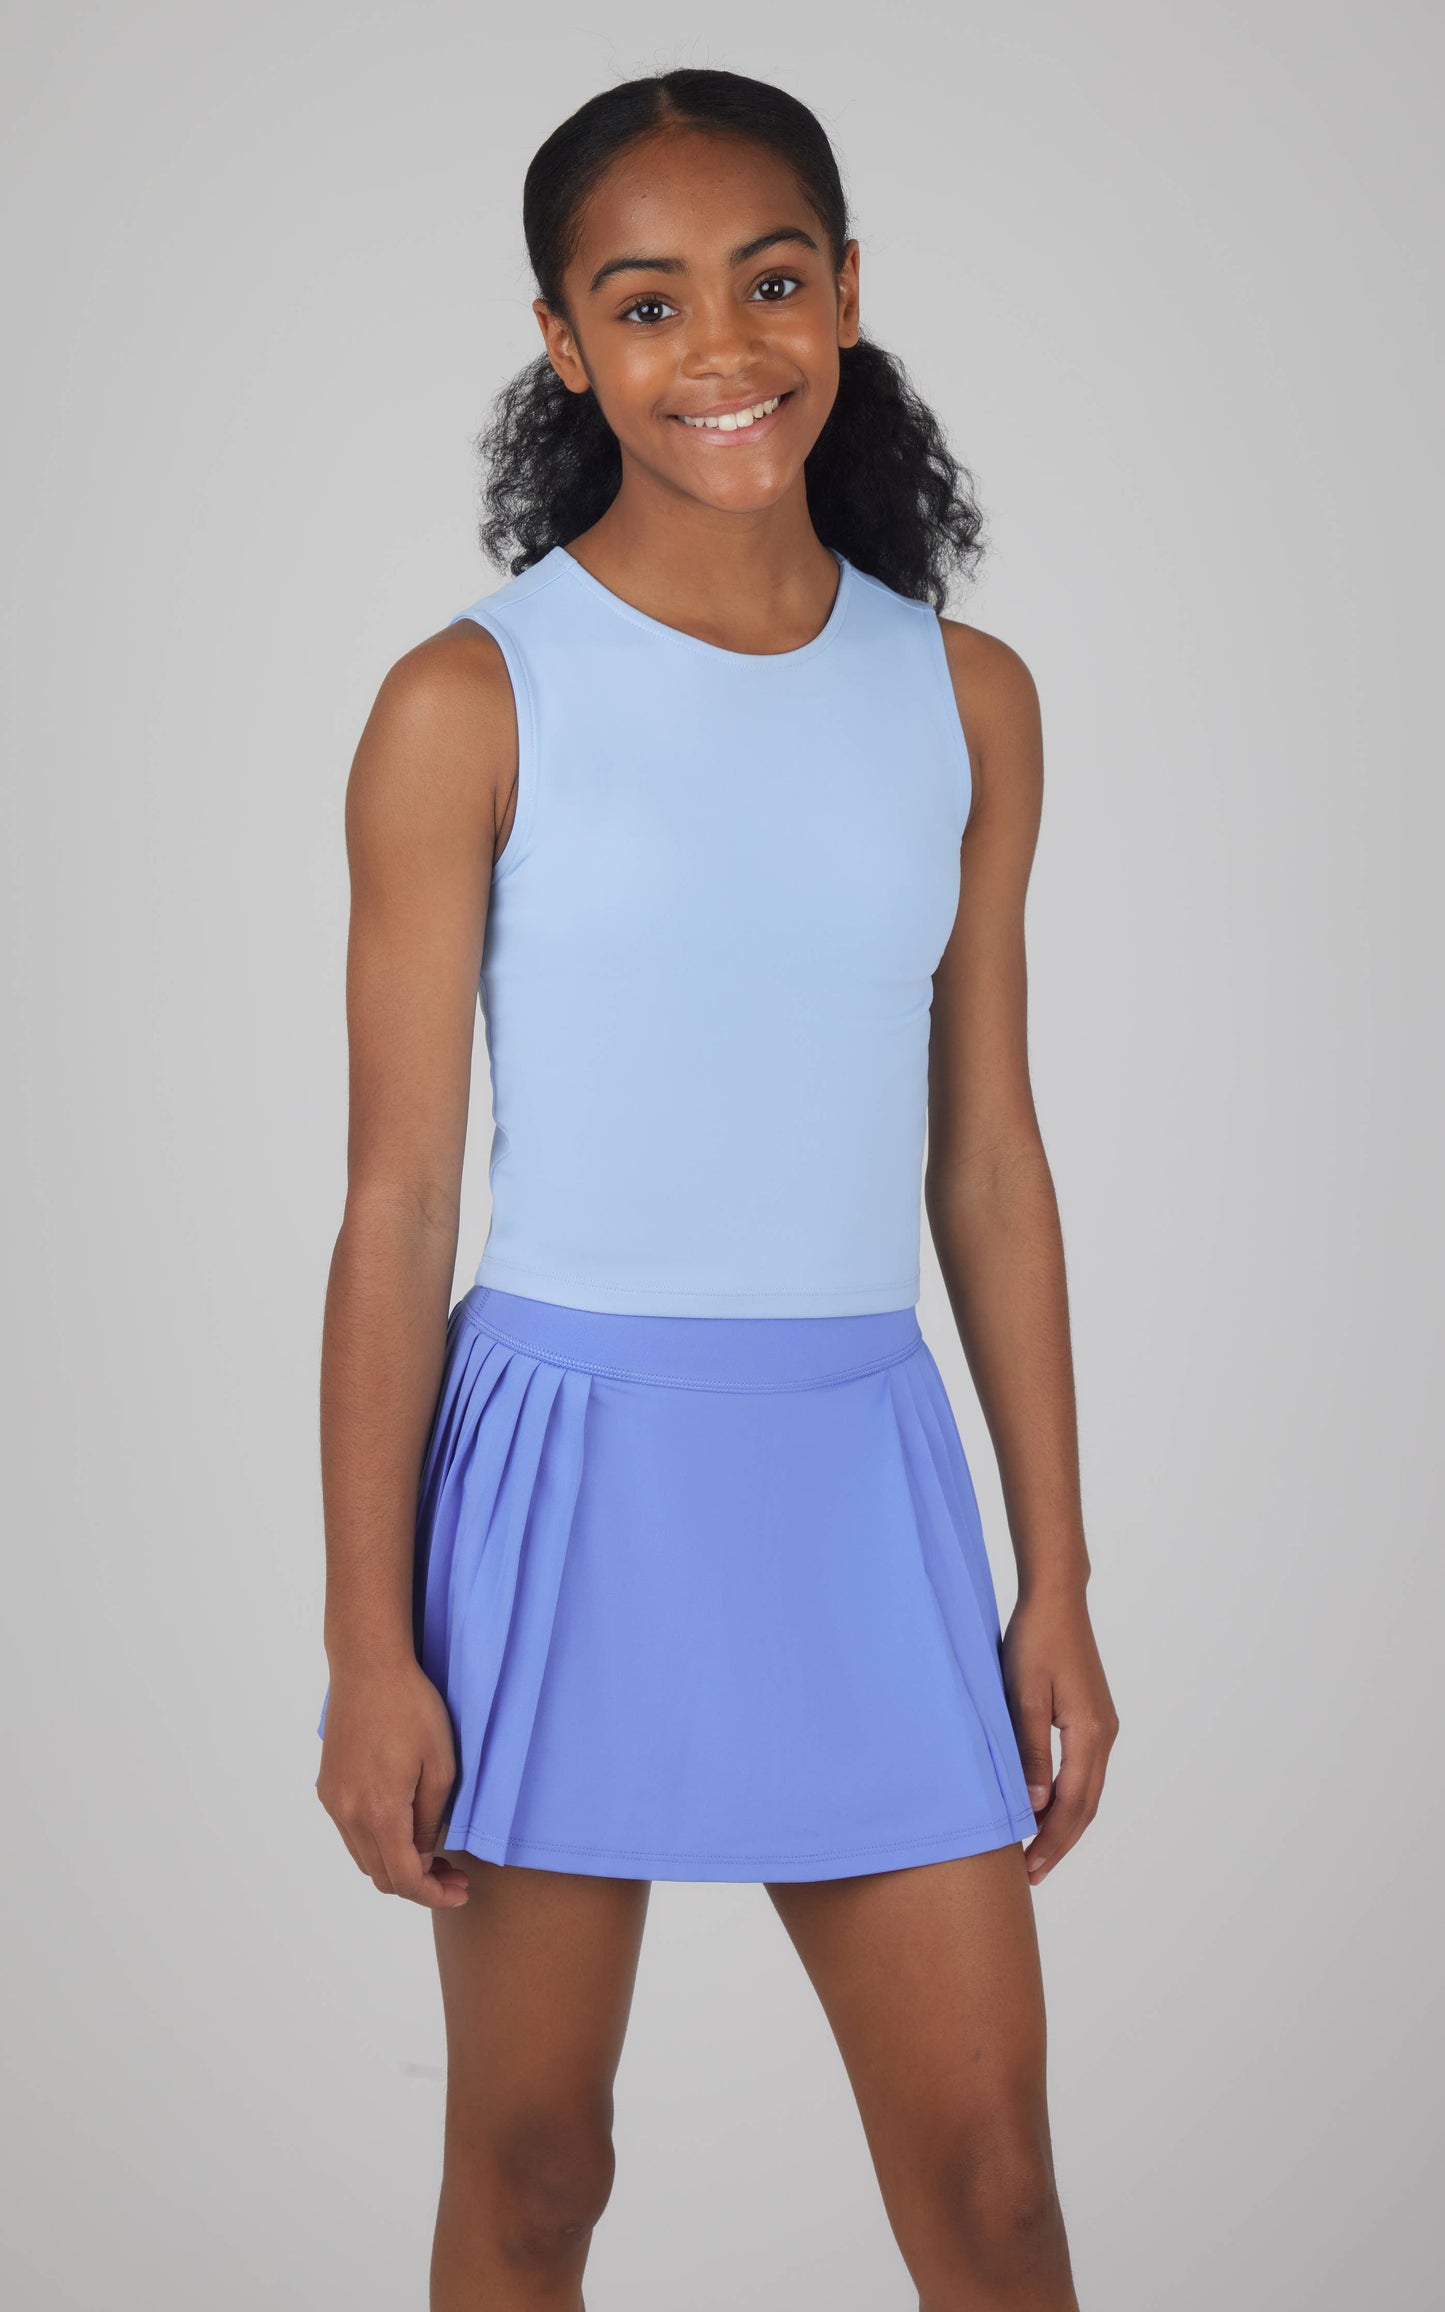 Lizzy Girls Basic Tank Top and Pleated Skort 2 PC Set